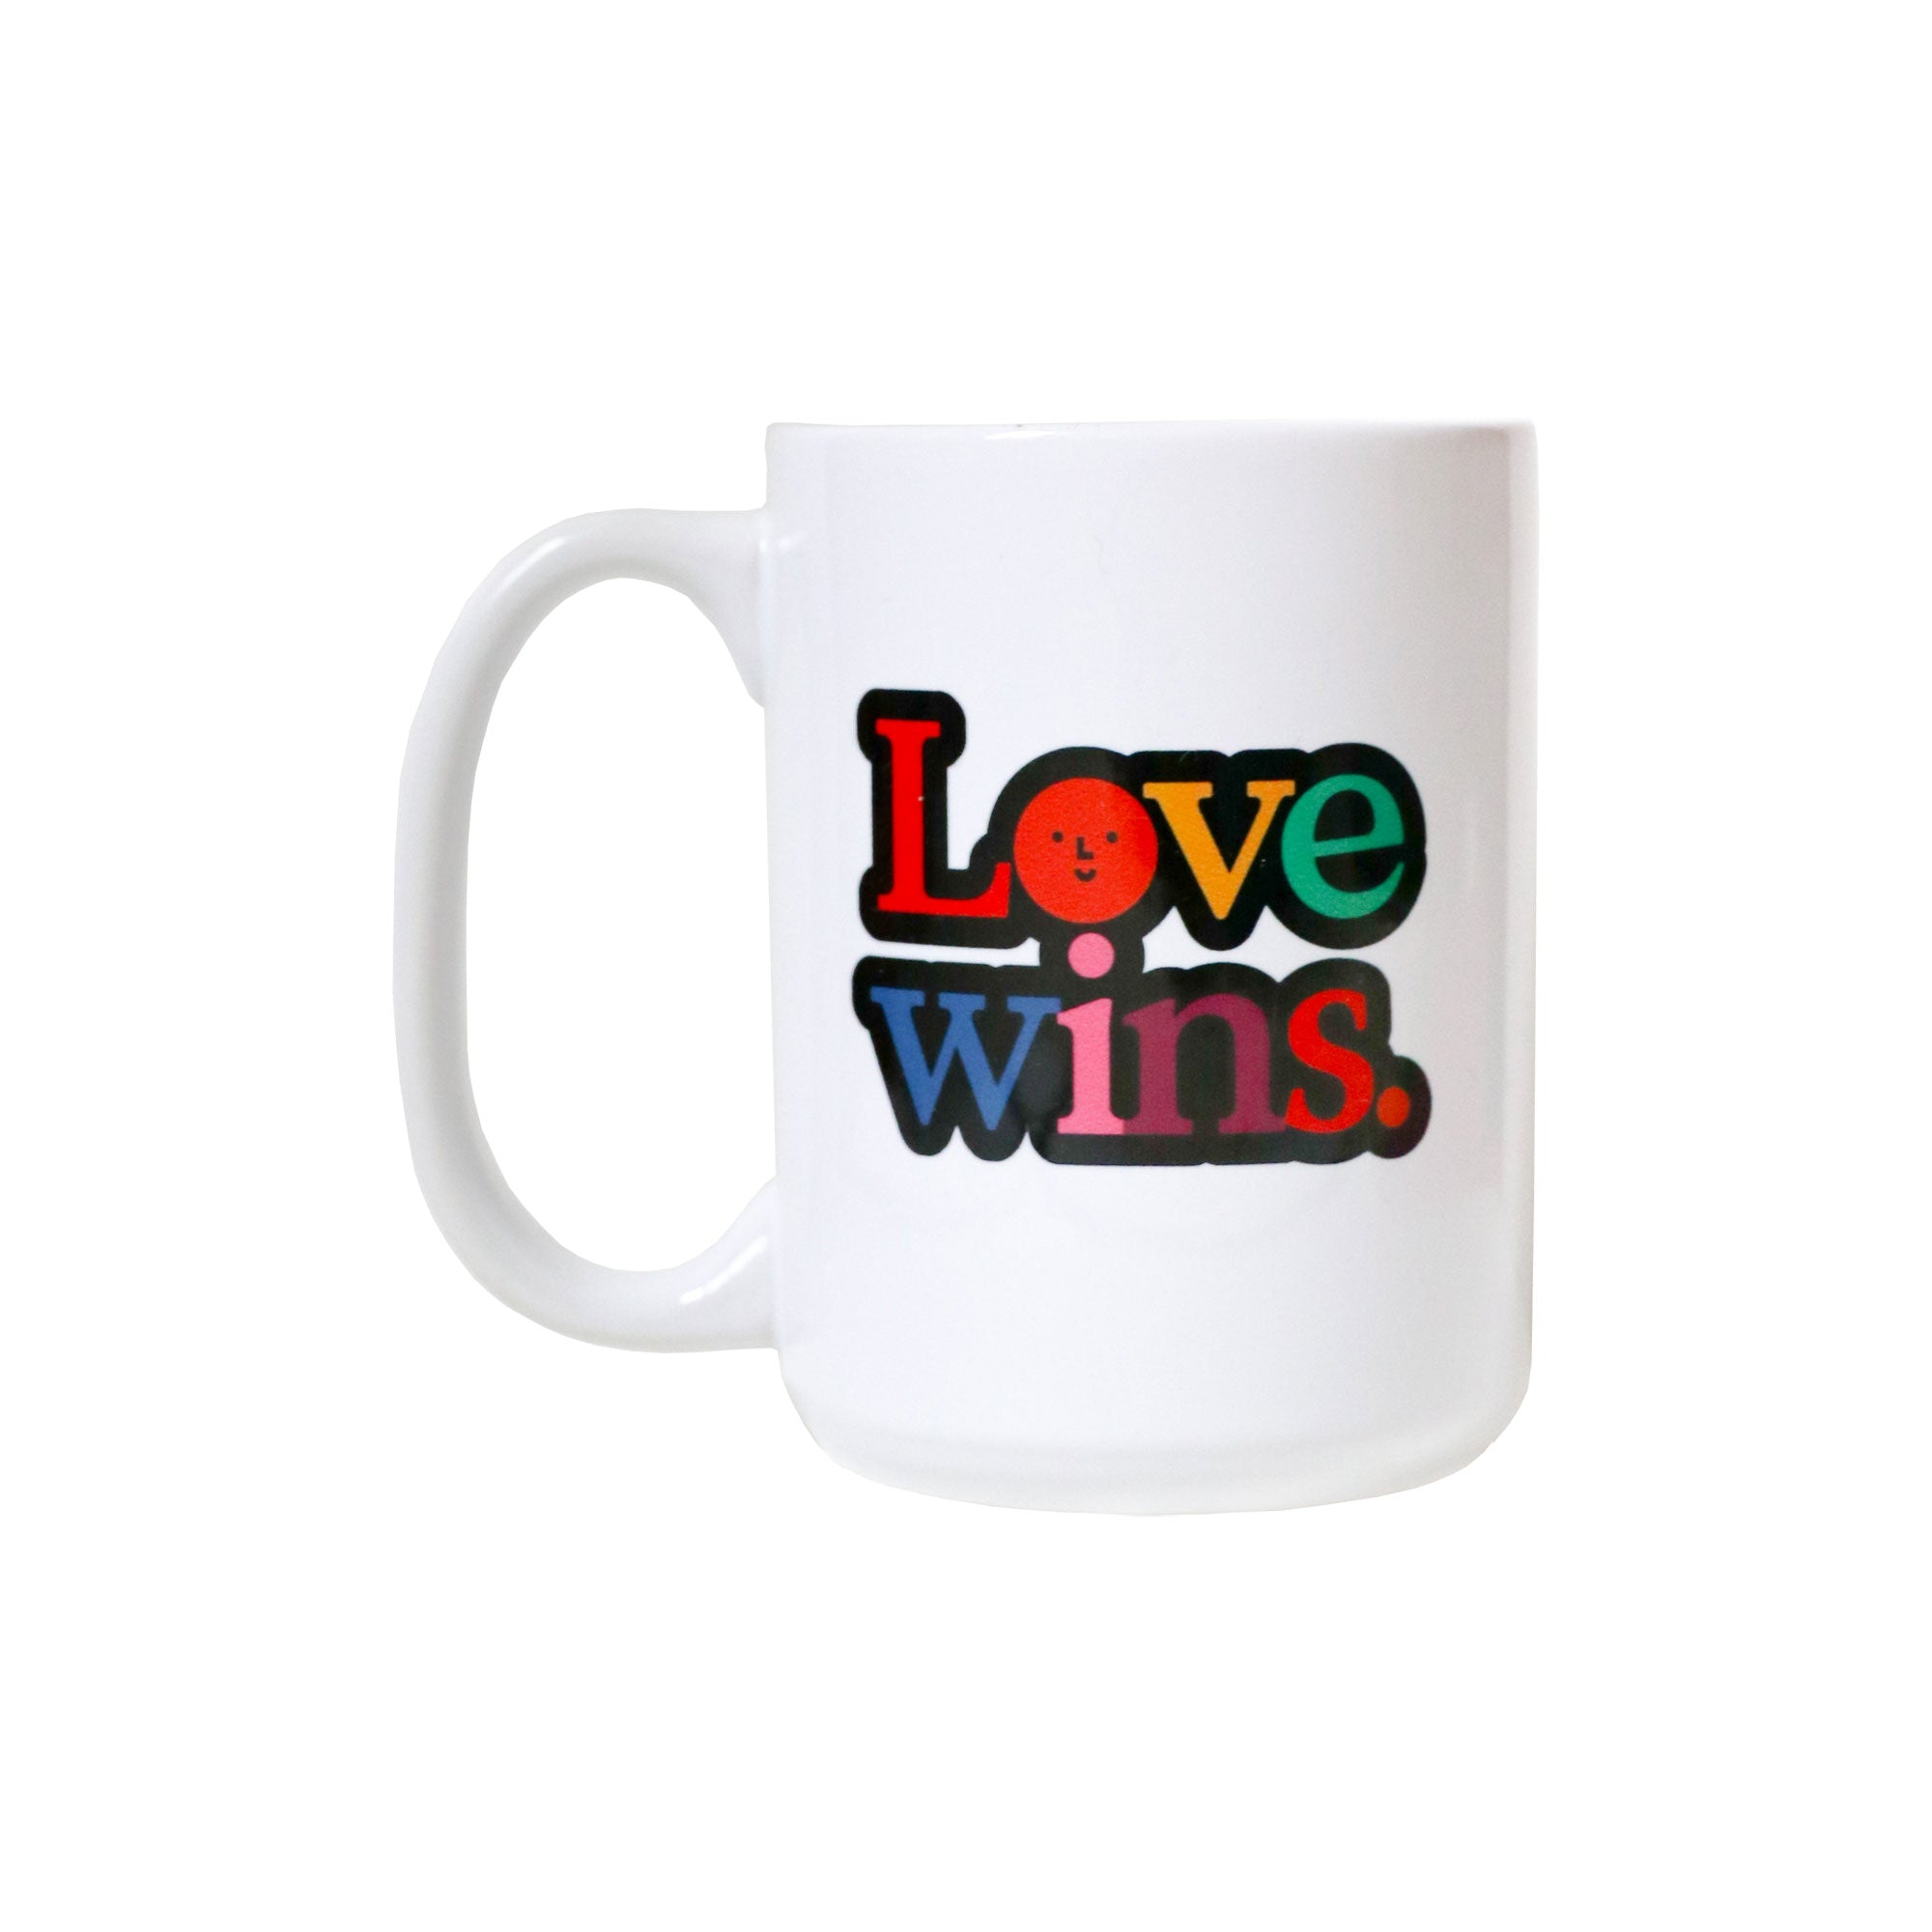 Large white mug with rainbow letters that spell "Love Wins". Designed by the Color Factory team for Pride. 